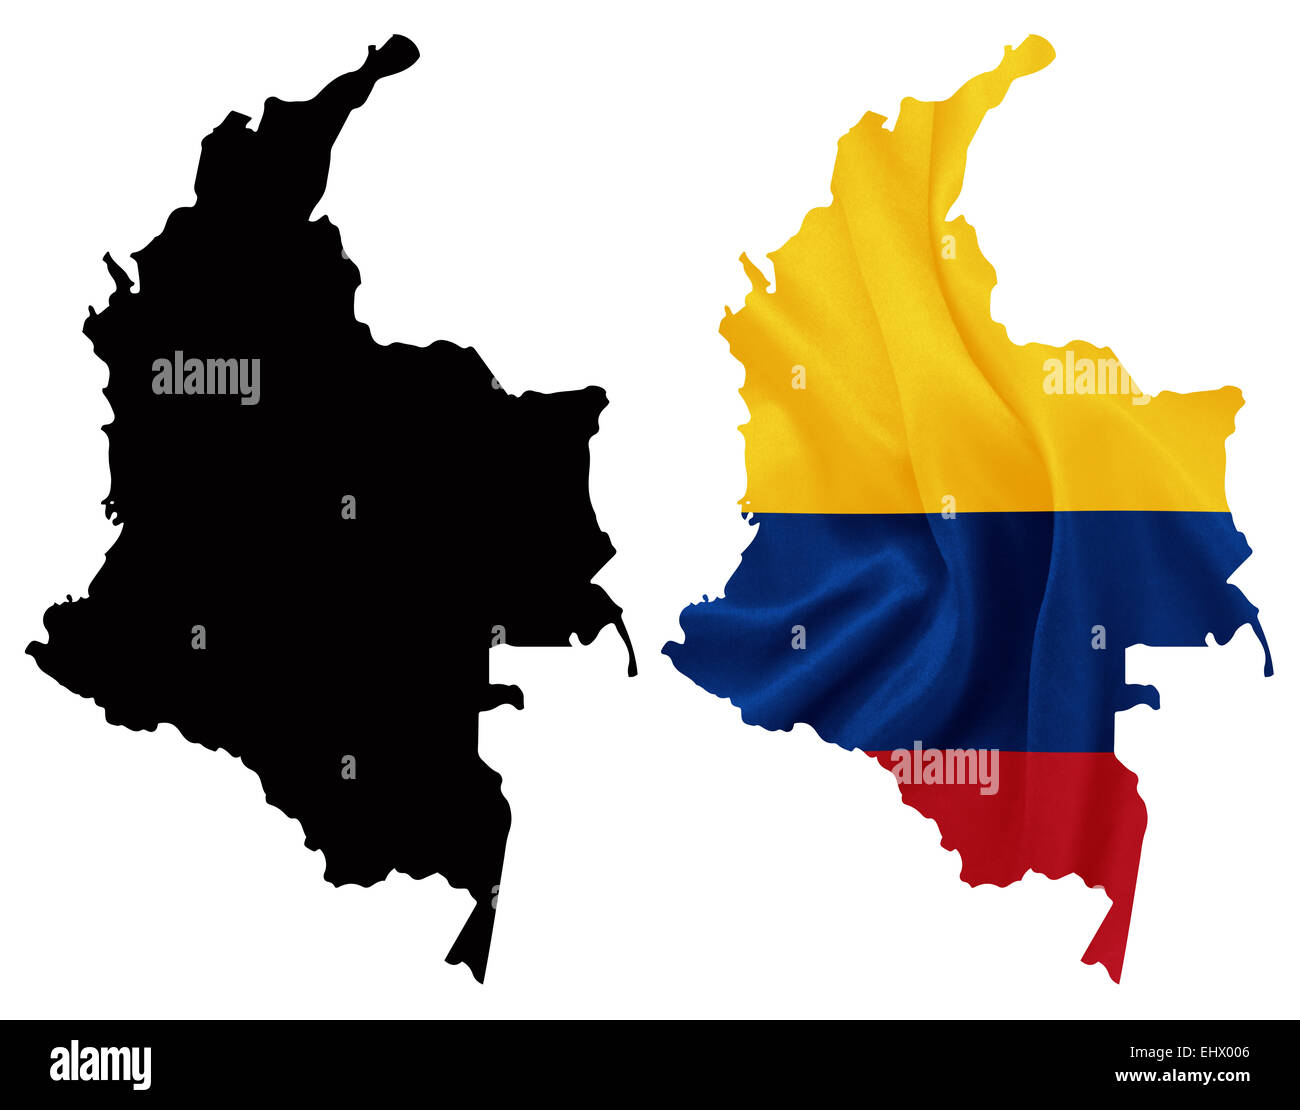 Colombia - Waving national flag on map contour with silk texture Stock Photo